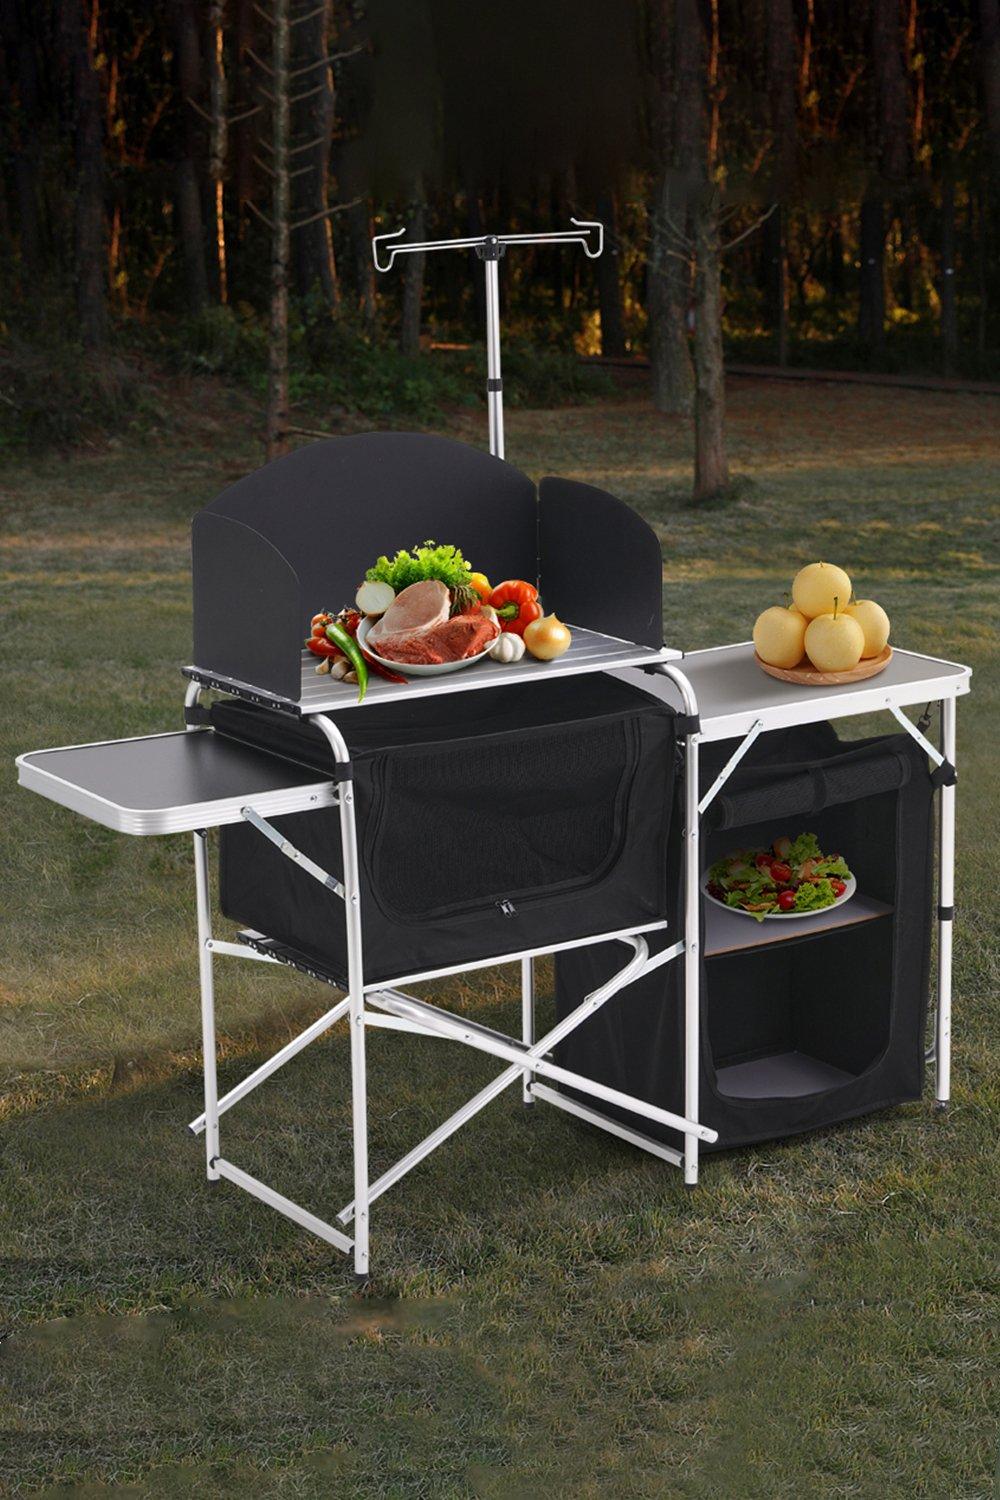 Aluminum Camp Kitchen with Zippered Storage and Camp Tables